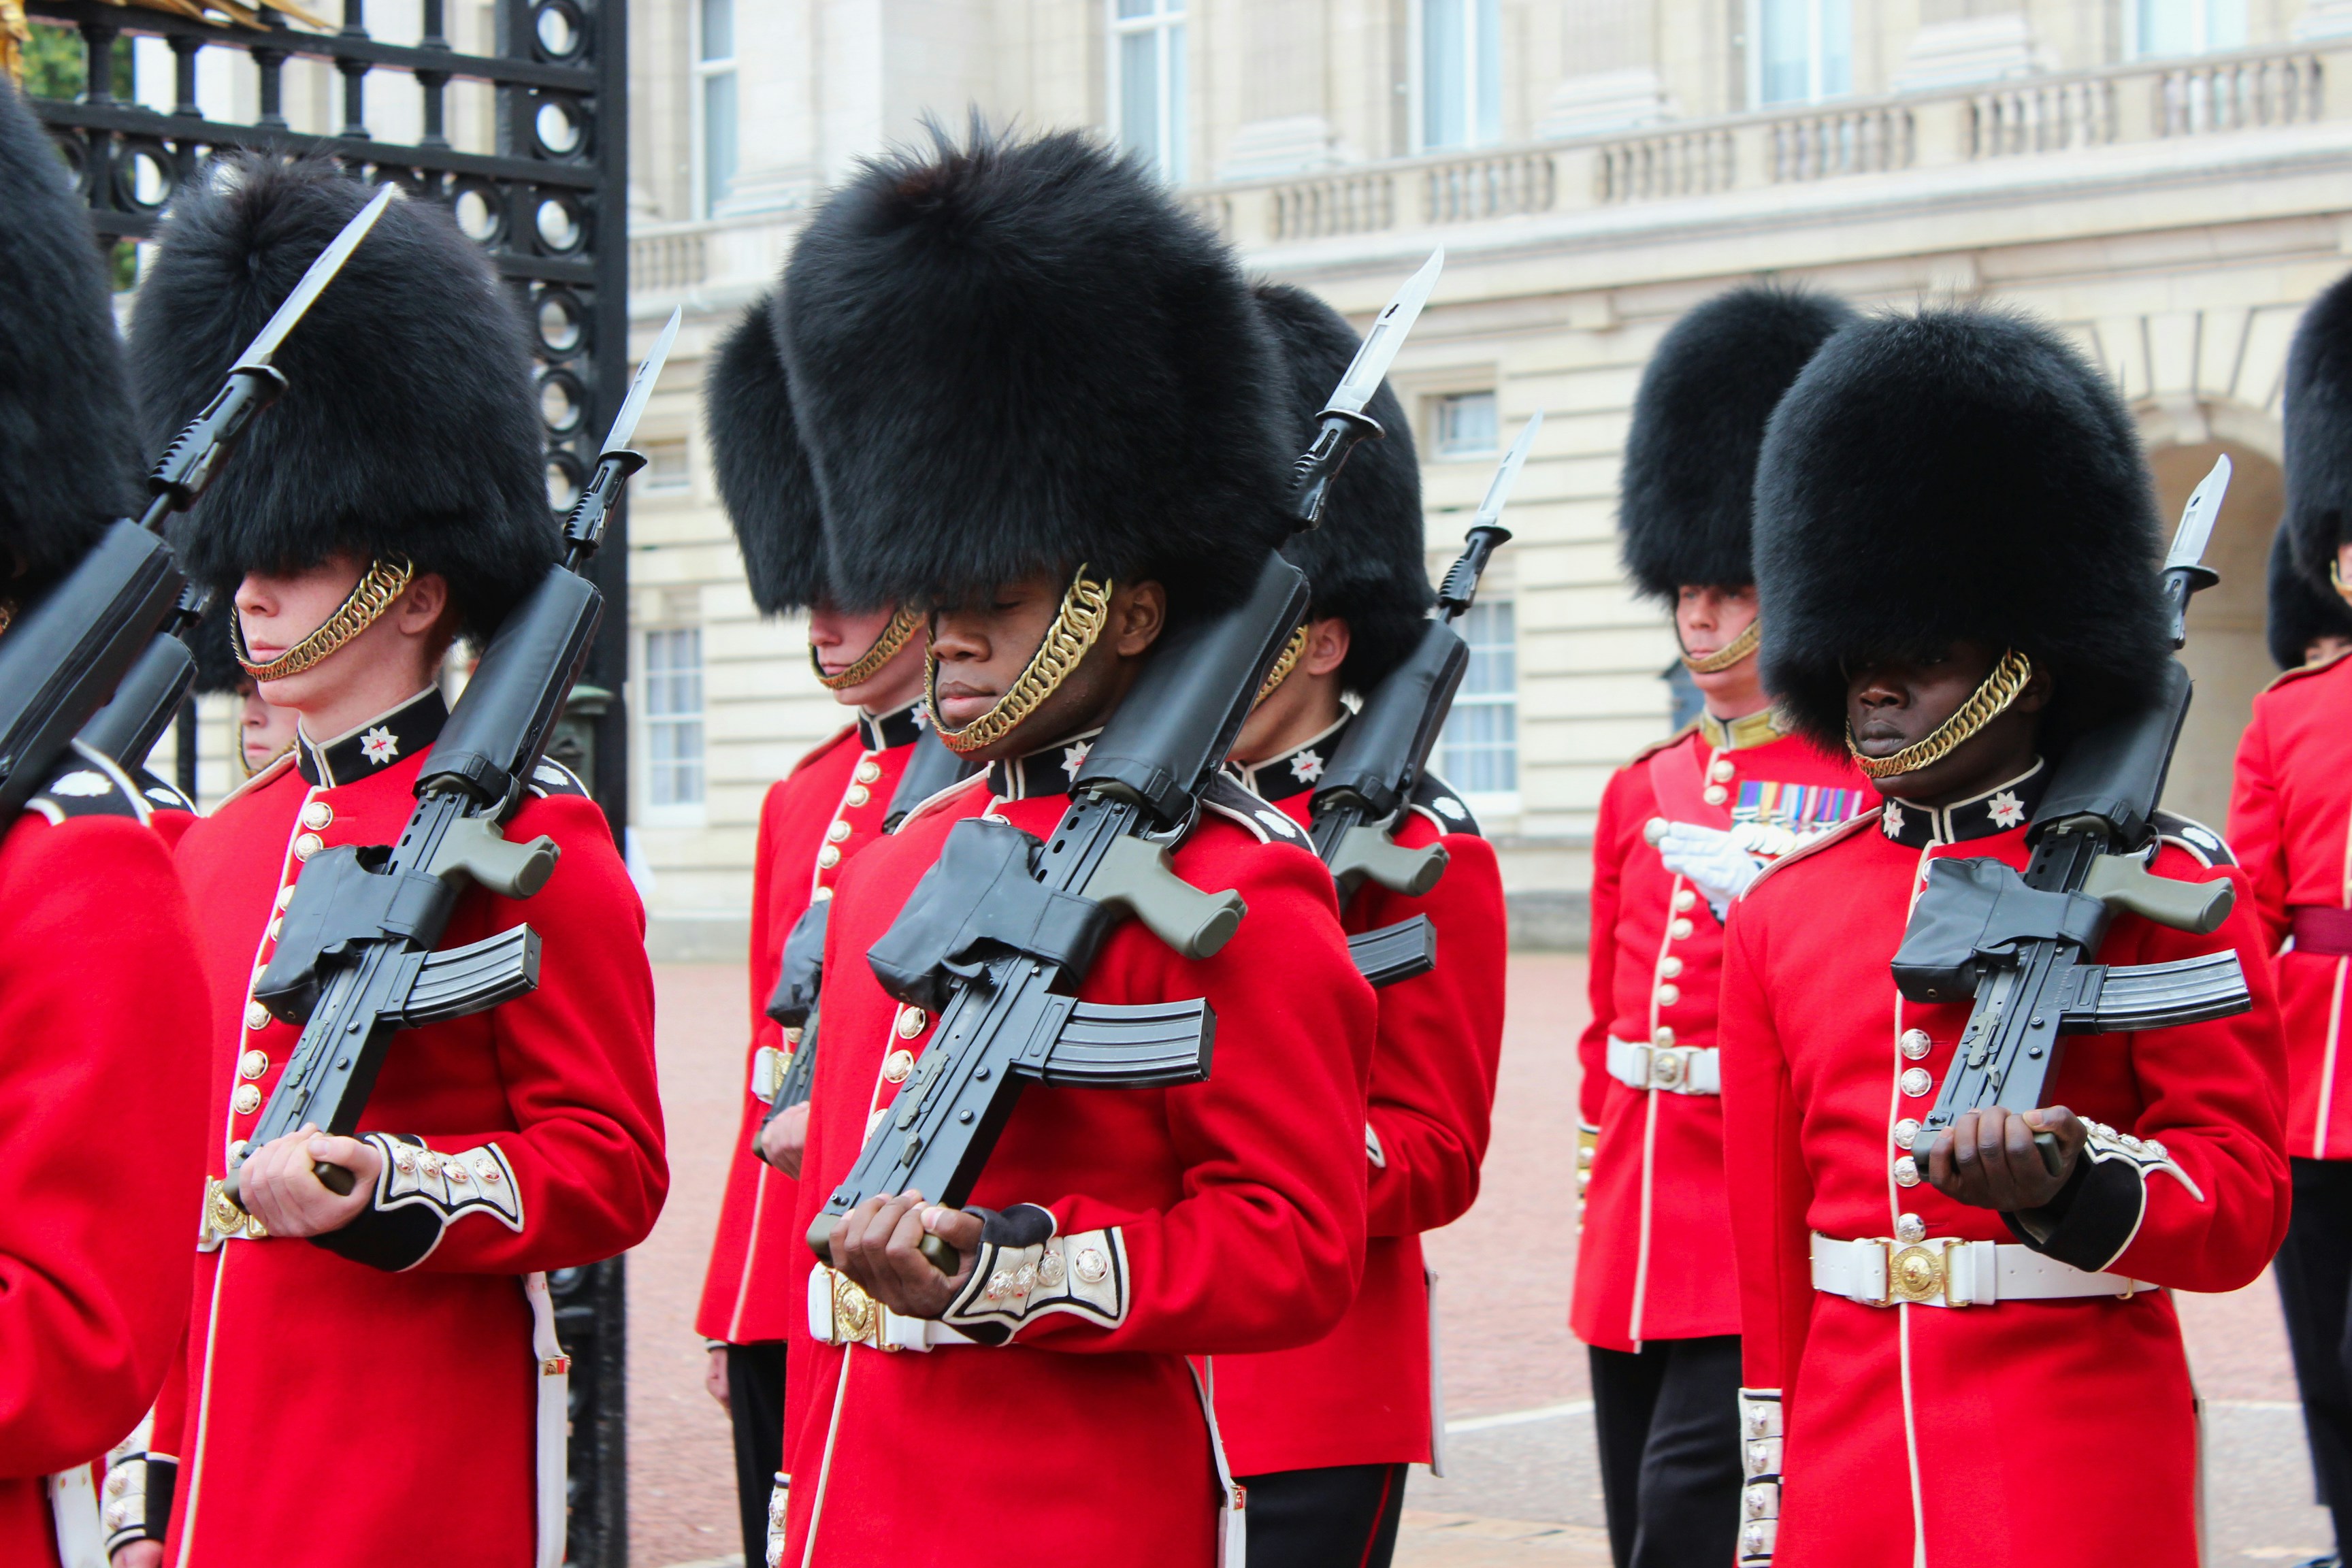 Queen's Guards at Buckingham Palace